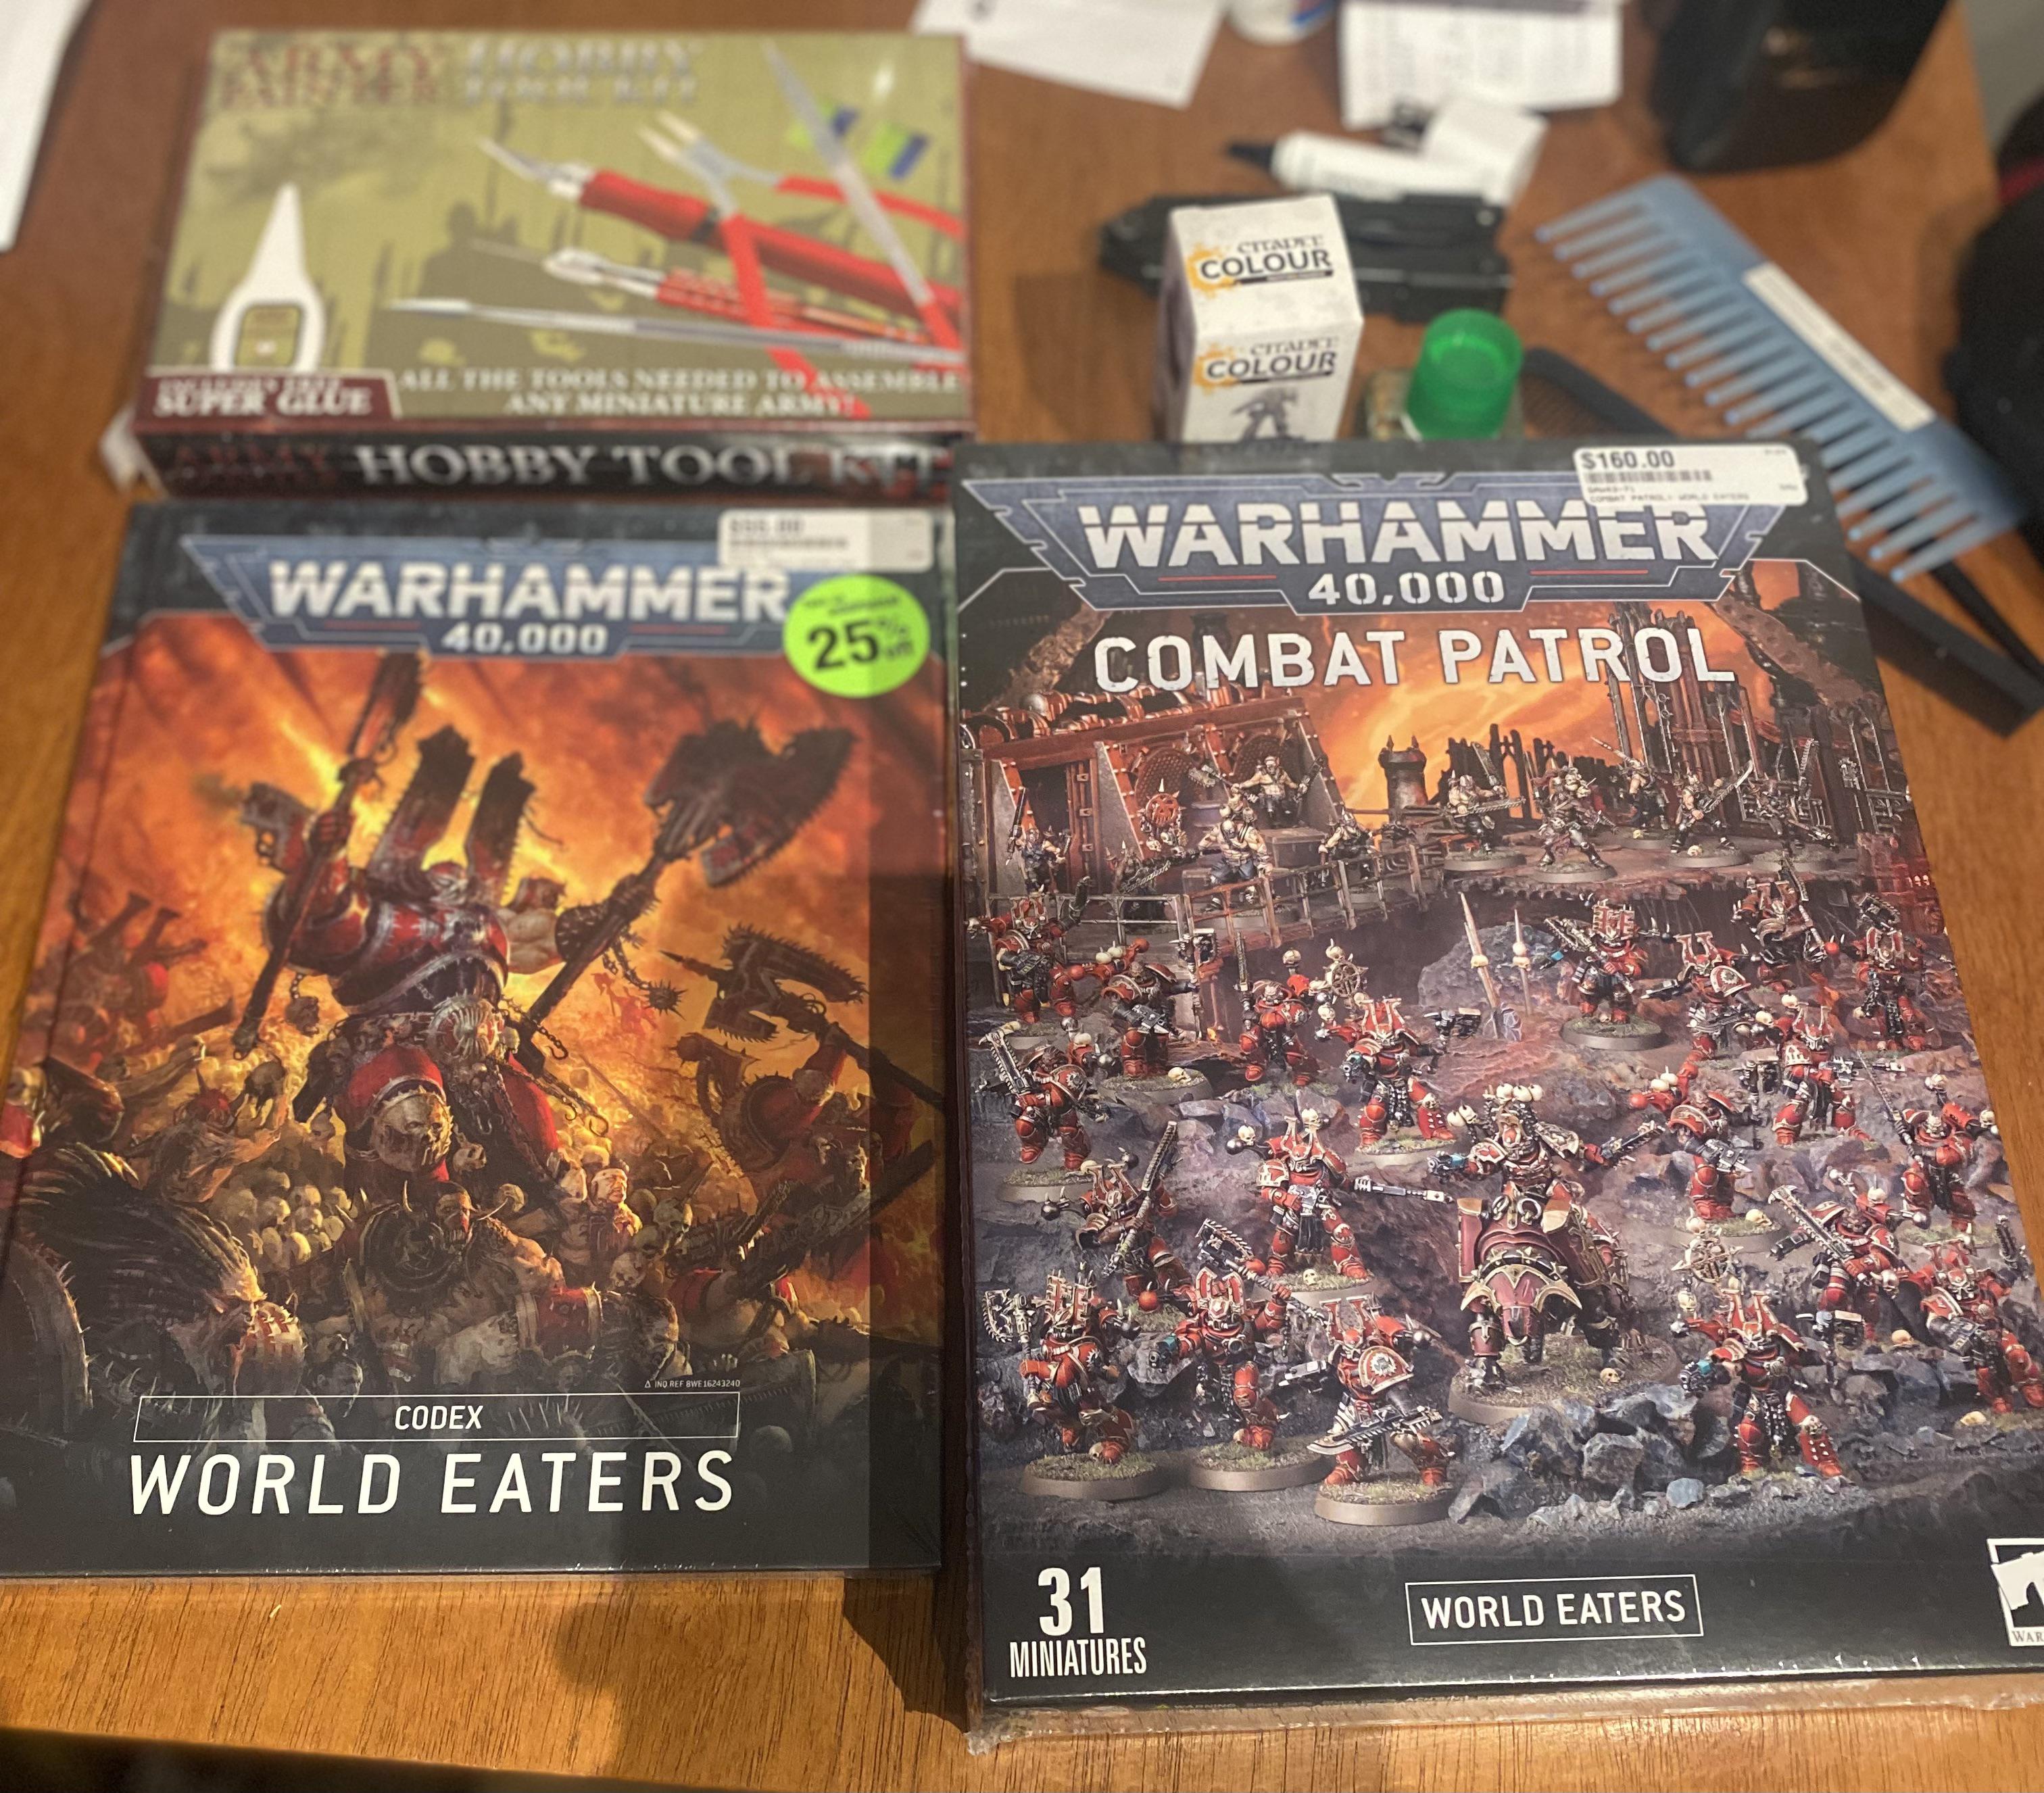 Warhammer 40k Games: Advanced Hobby Tips and Tricks for Experienced Hobbyists